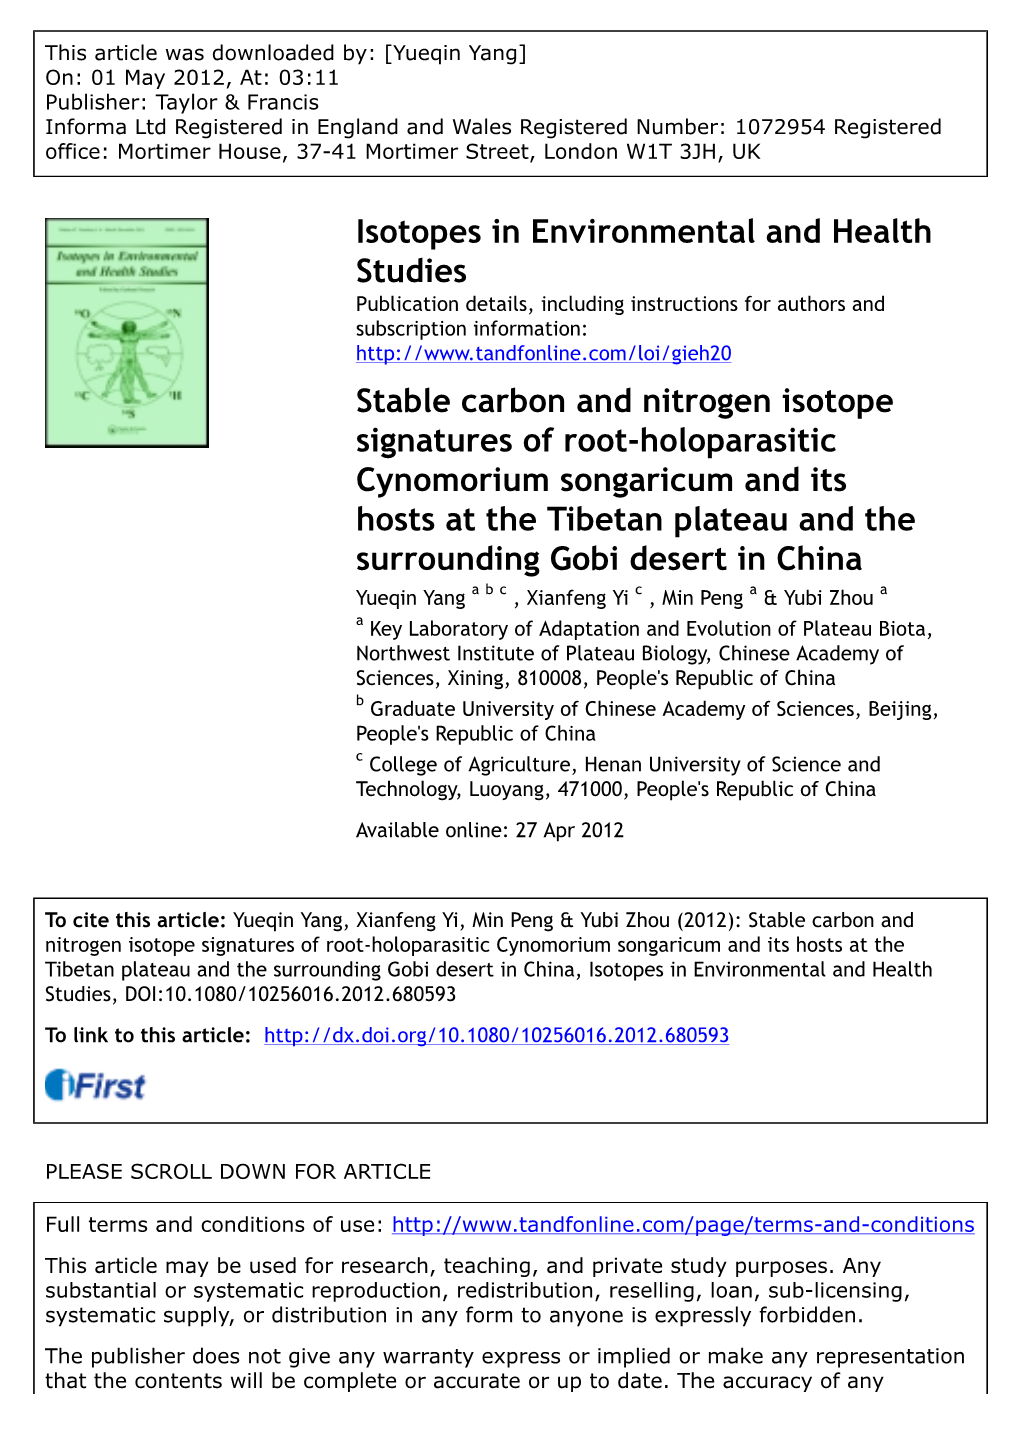 Stable Carbon and Nitrogen Isotope Signatures of Root-Holoparasitic Cynomorium Songaricum and Its Hosts at the Tibetan Plateau A